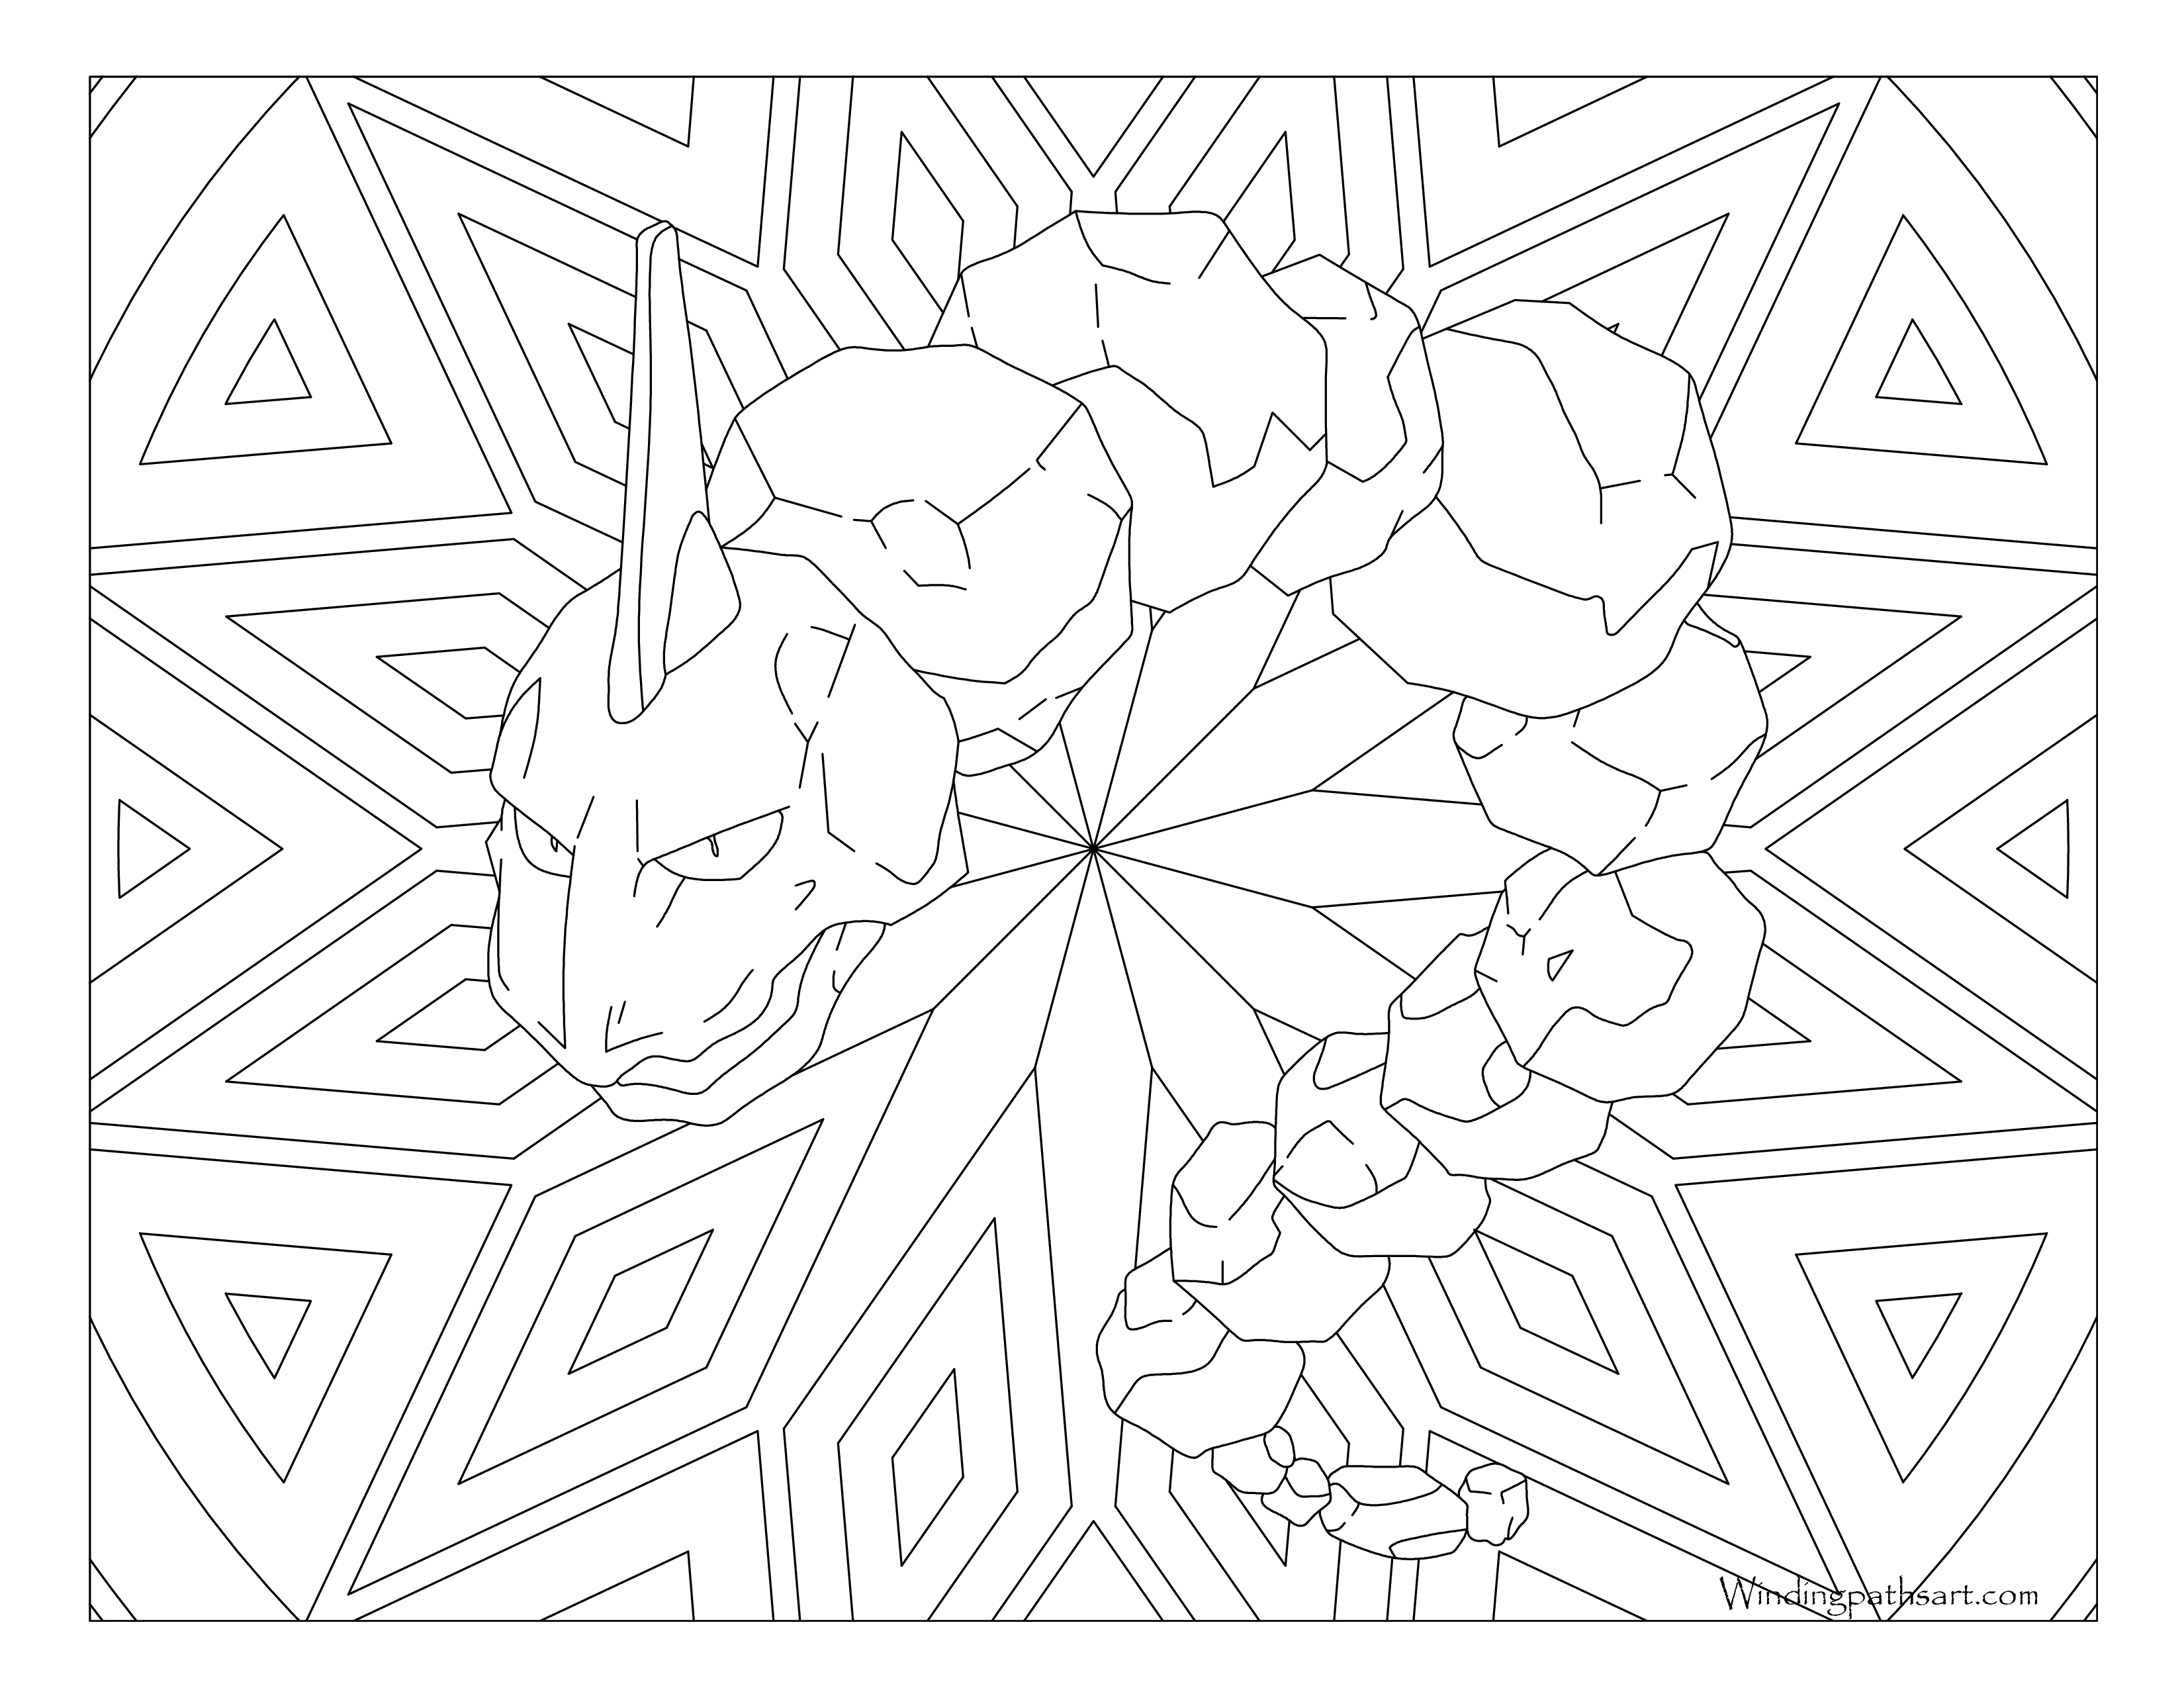 095 - Onix coloring pages, Pokemon coloring pages 